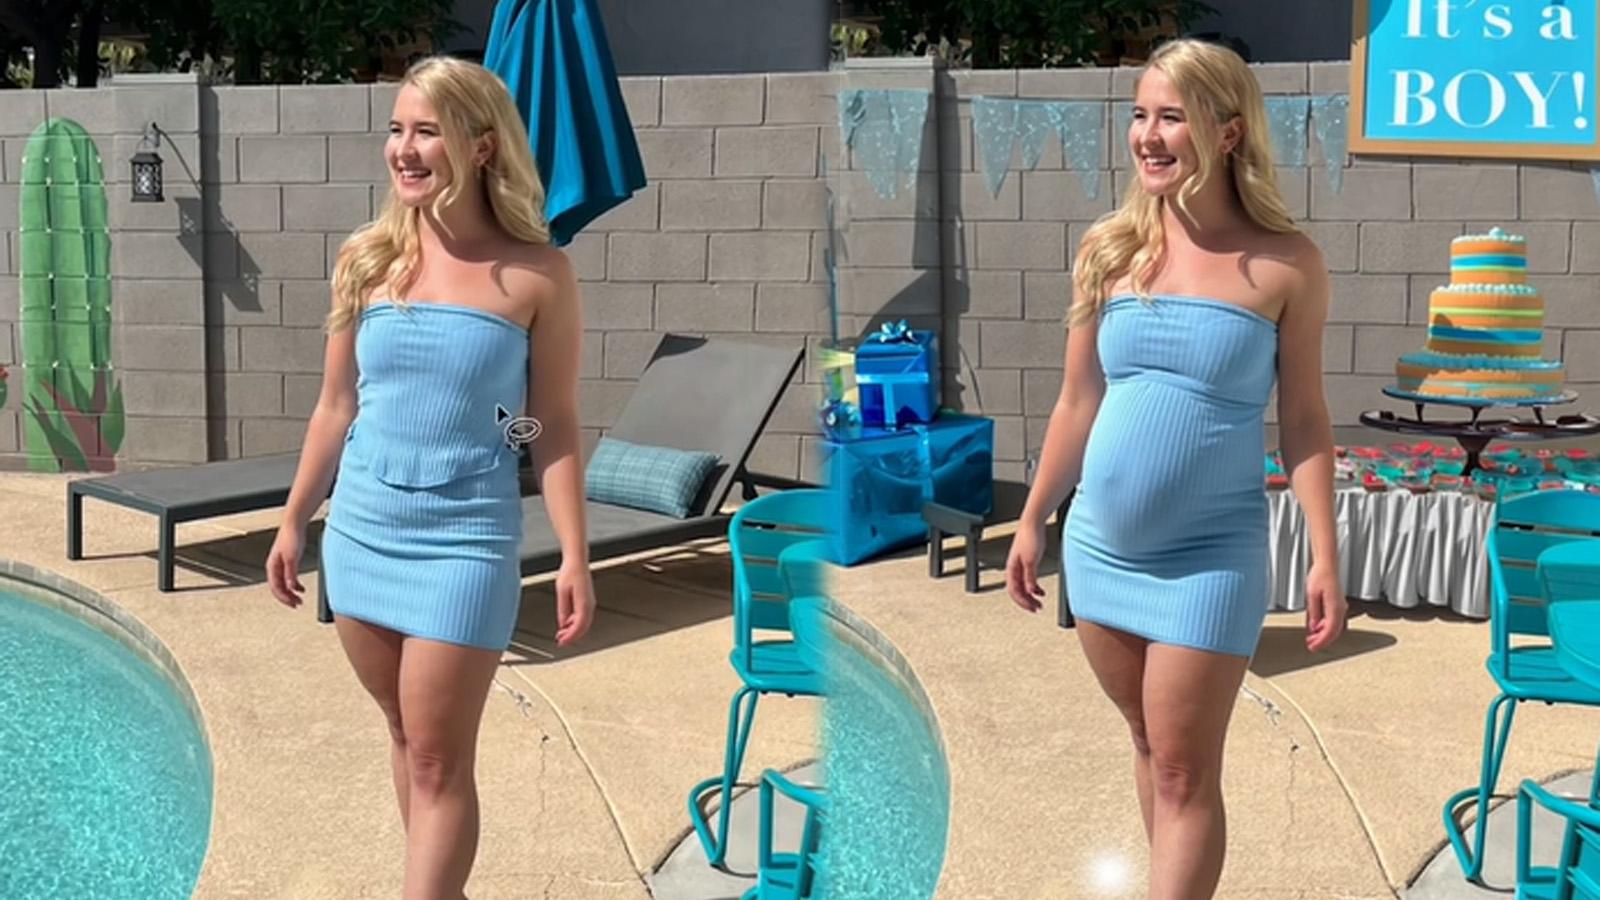 TV producer trolls exes with AI-generated pregnancy